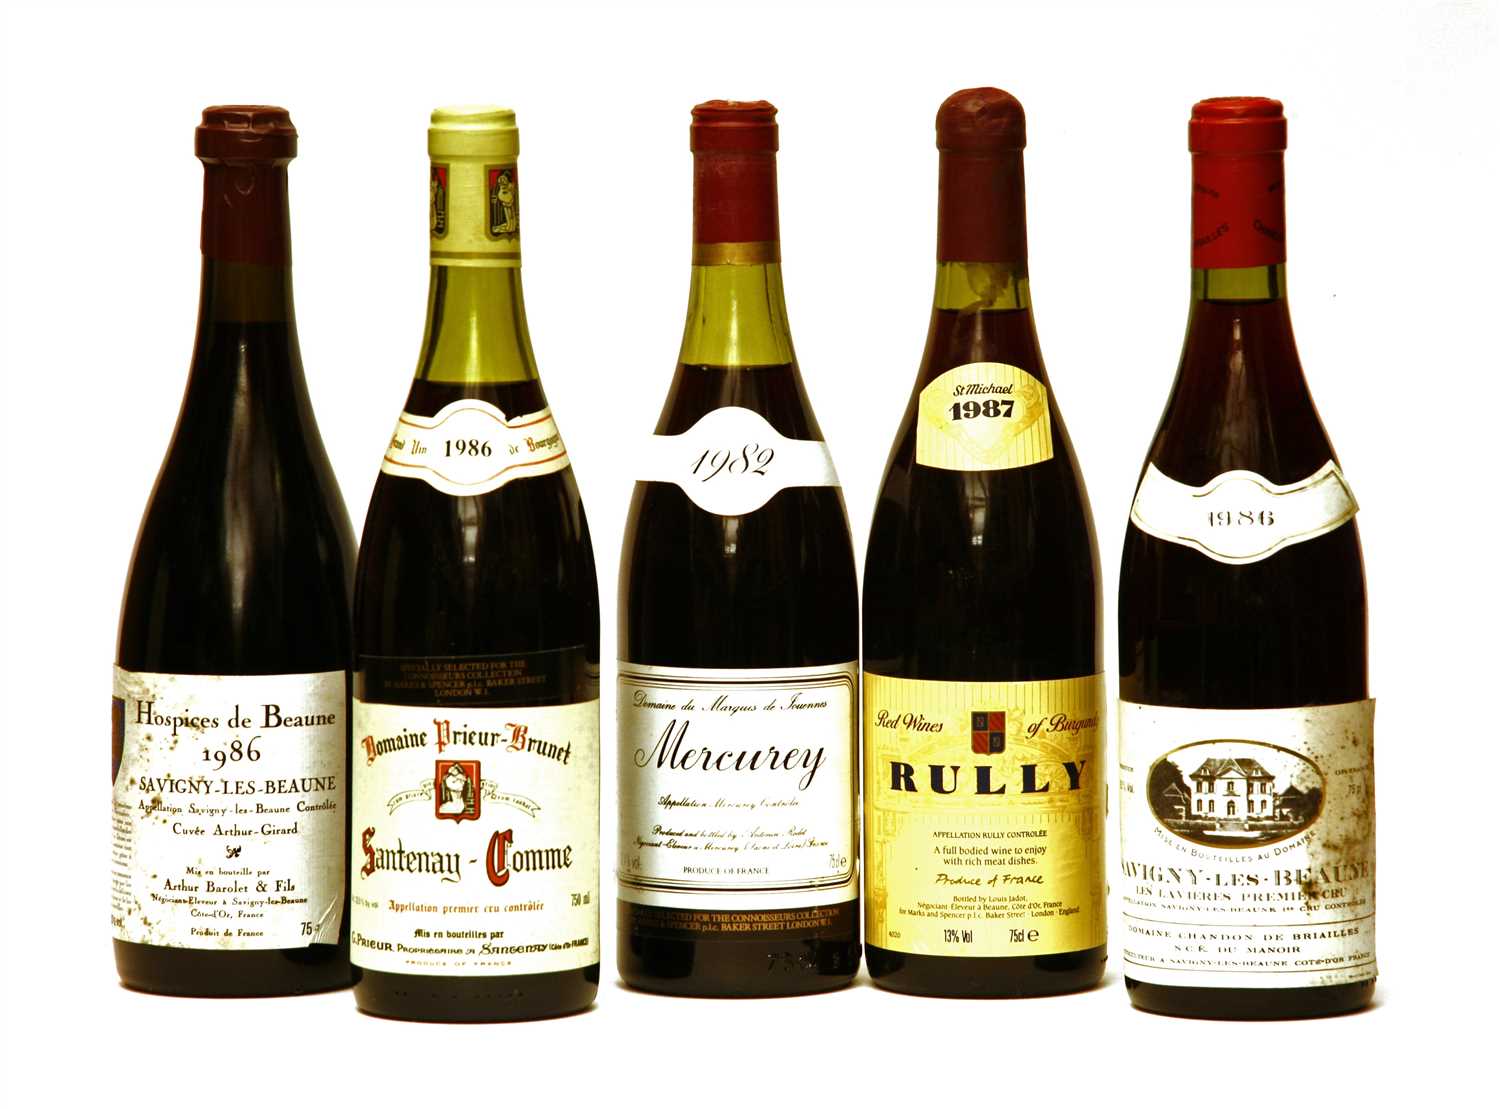 Lot 134 - Assorted Red Burgundy: Hospices de Beaune, 1986, one bottle and four other bottles